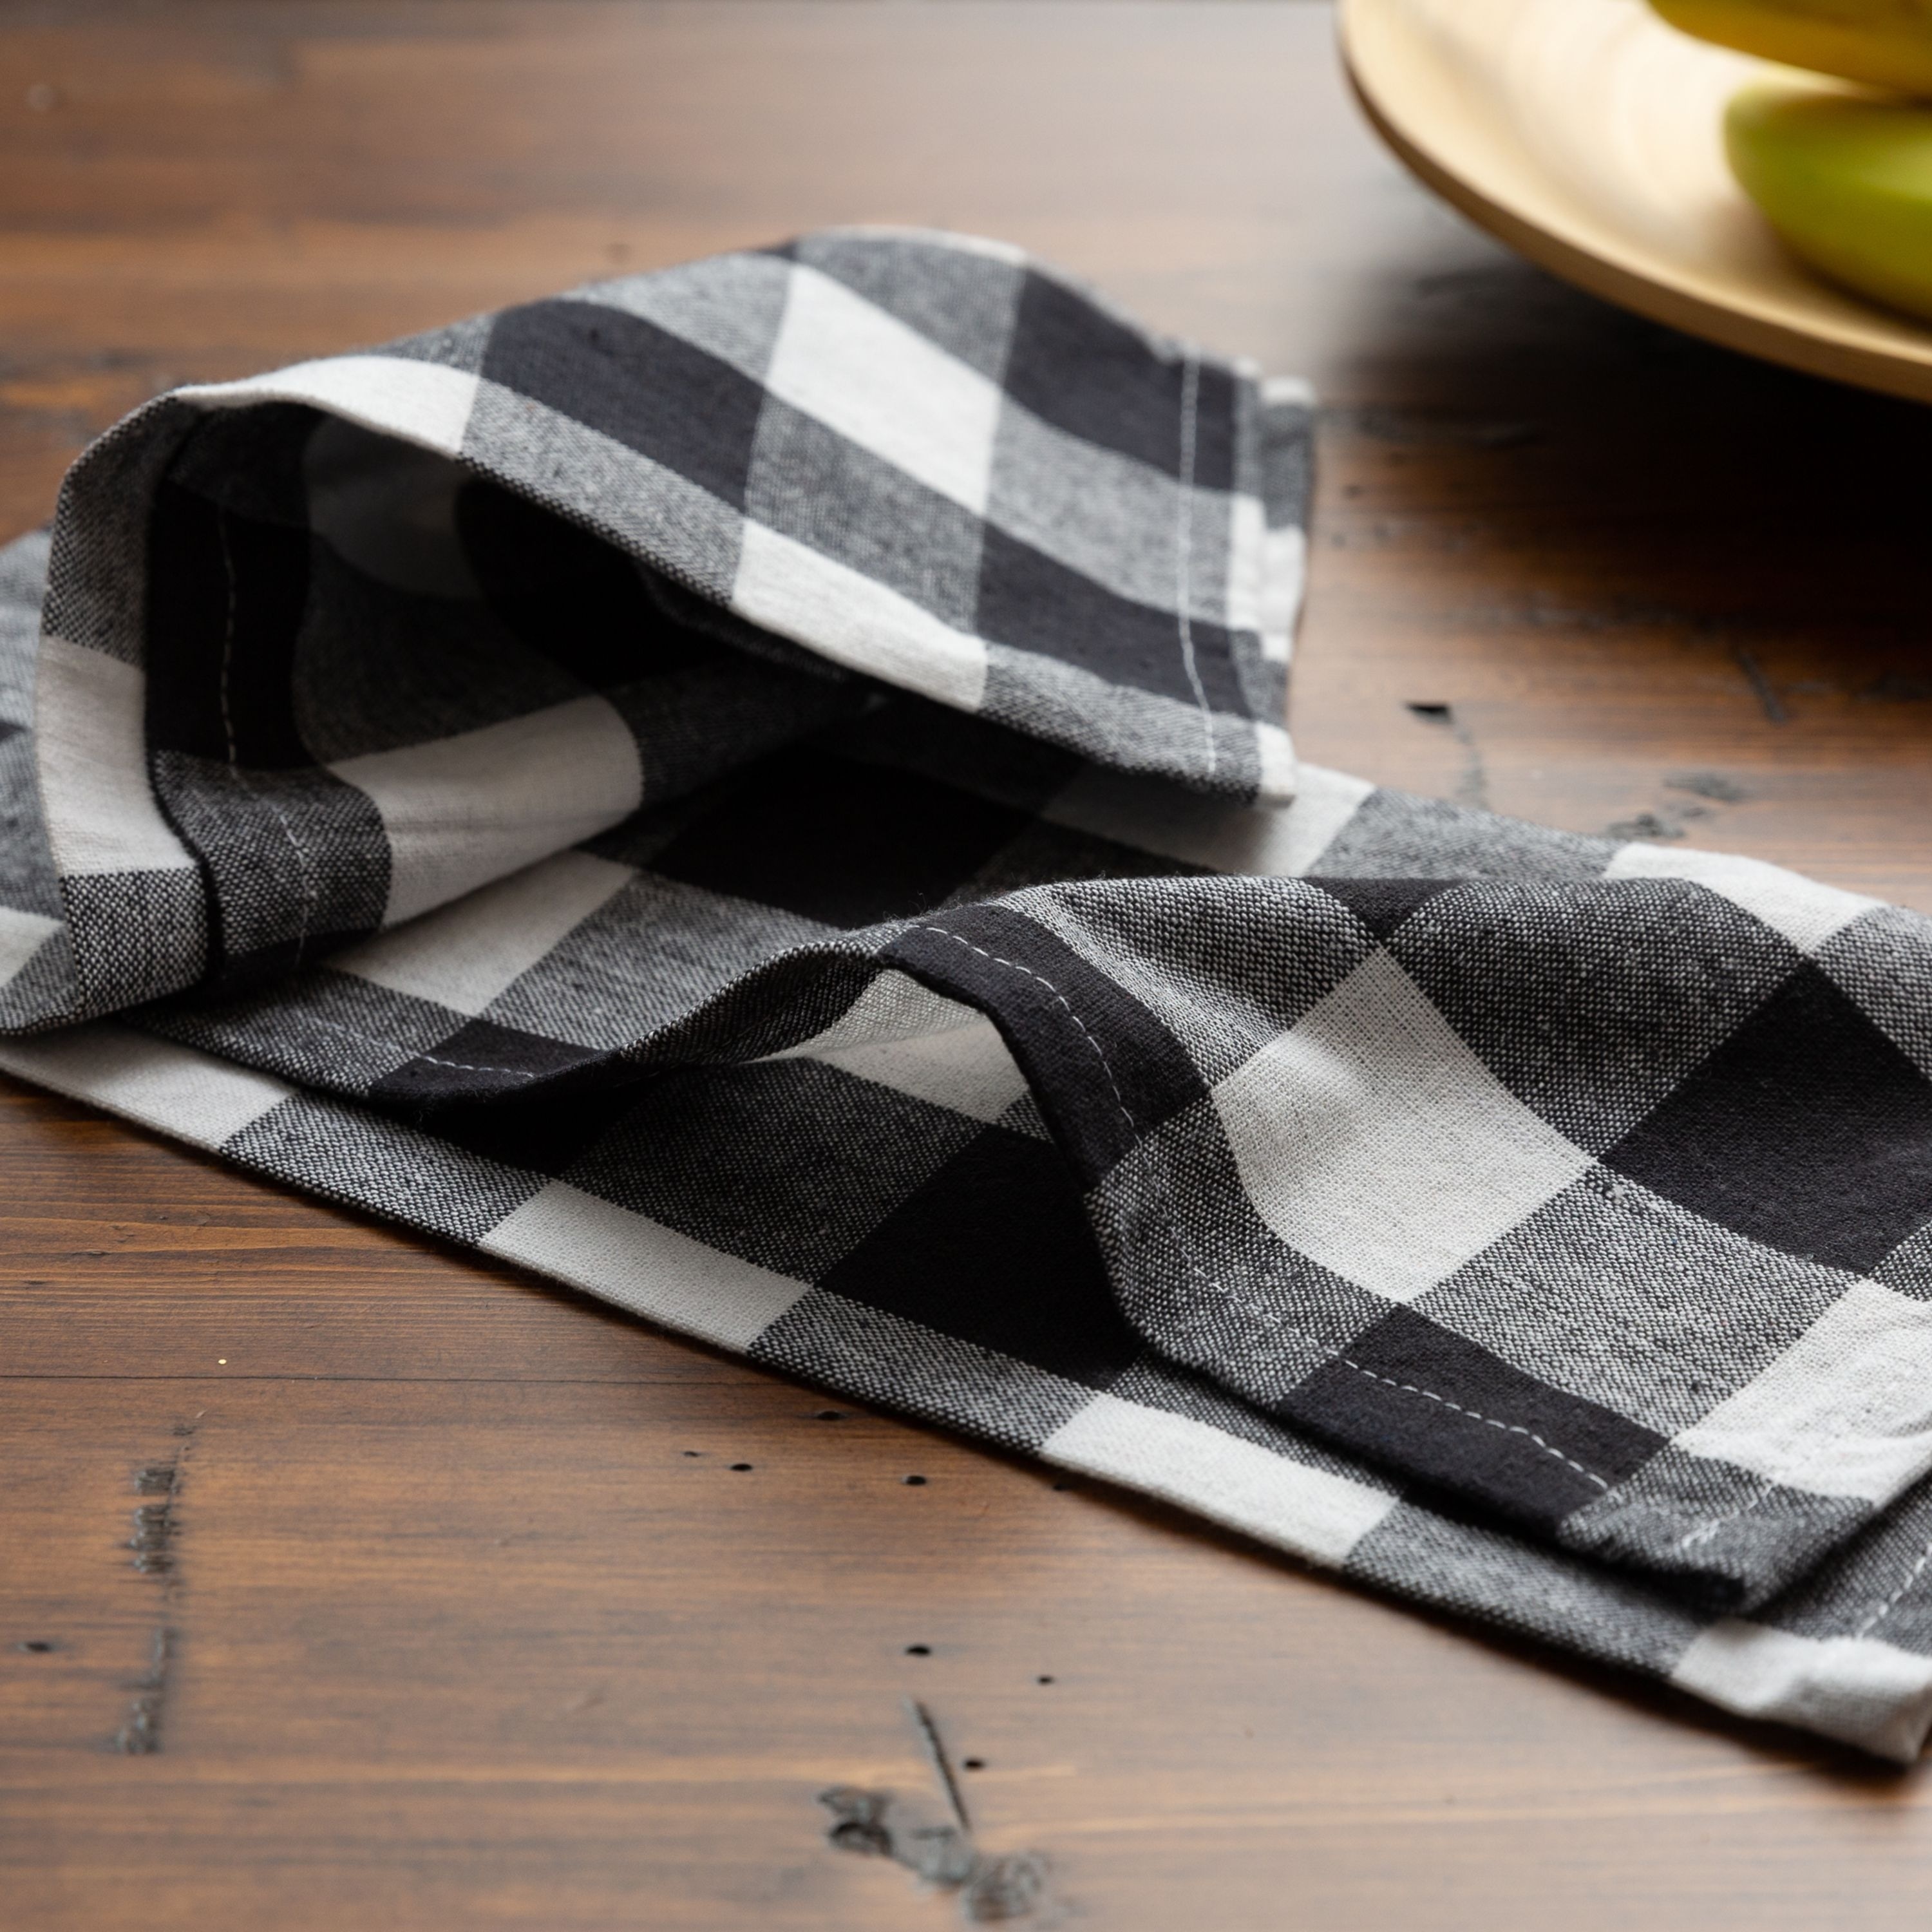 https://ak1.ostkcdn.com/images/products/is/images/direct/e5ac20ee1a8f0b7f6f9220b096ce3549c250dedb/Fabstyles-Country-Check-Cotton-Kitchen-Towel-Set-of-4.jpg